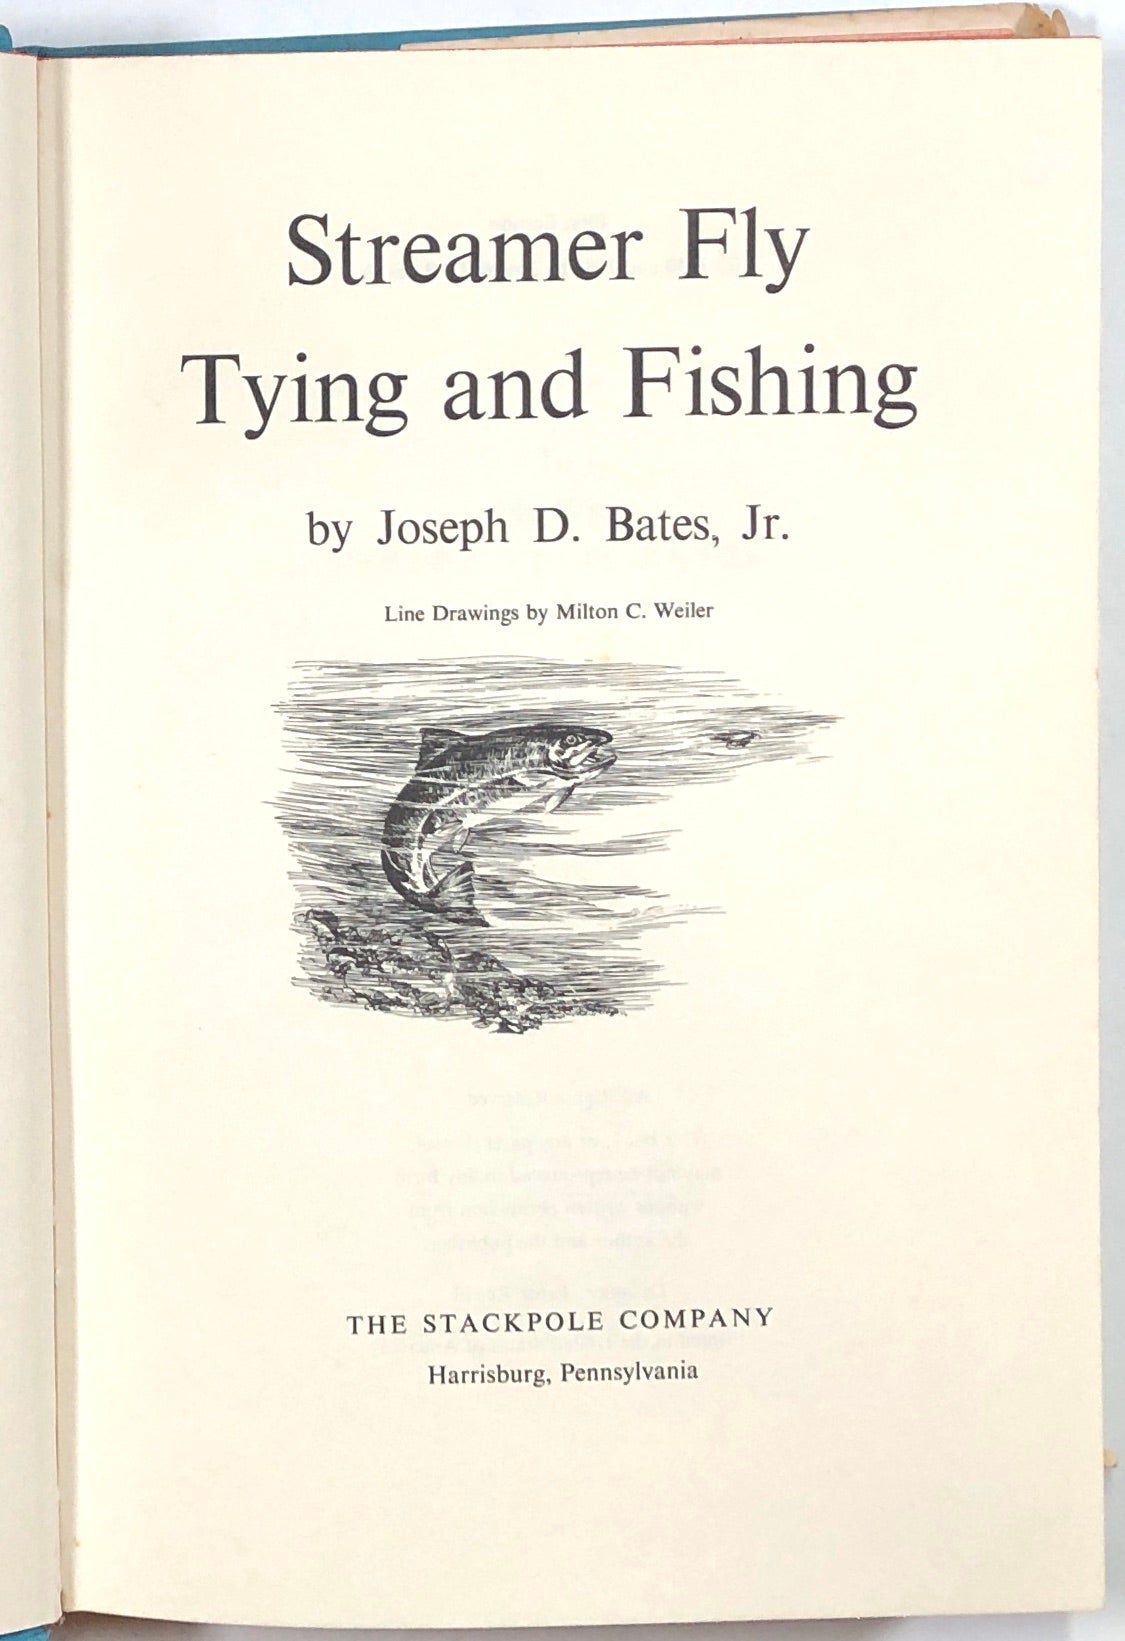 Streamer Fly Tying and Fishing by Joseph D. Bates, Jr., Milton C. Weiler on  Common Crow Books